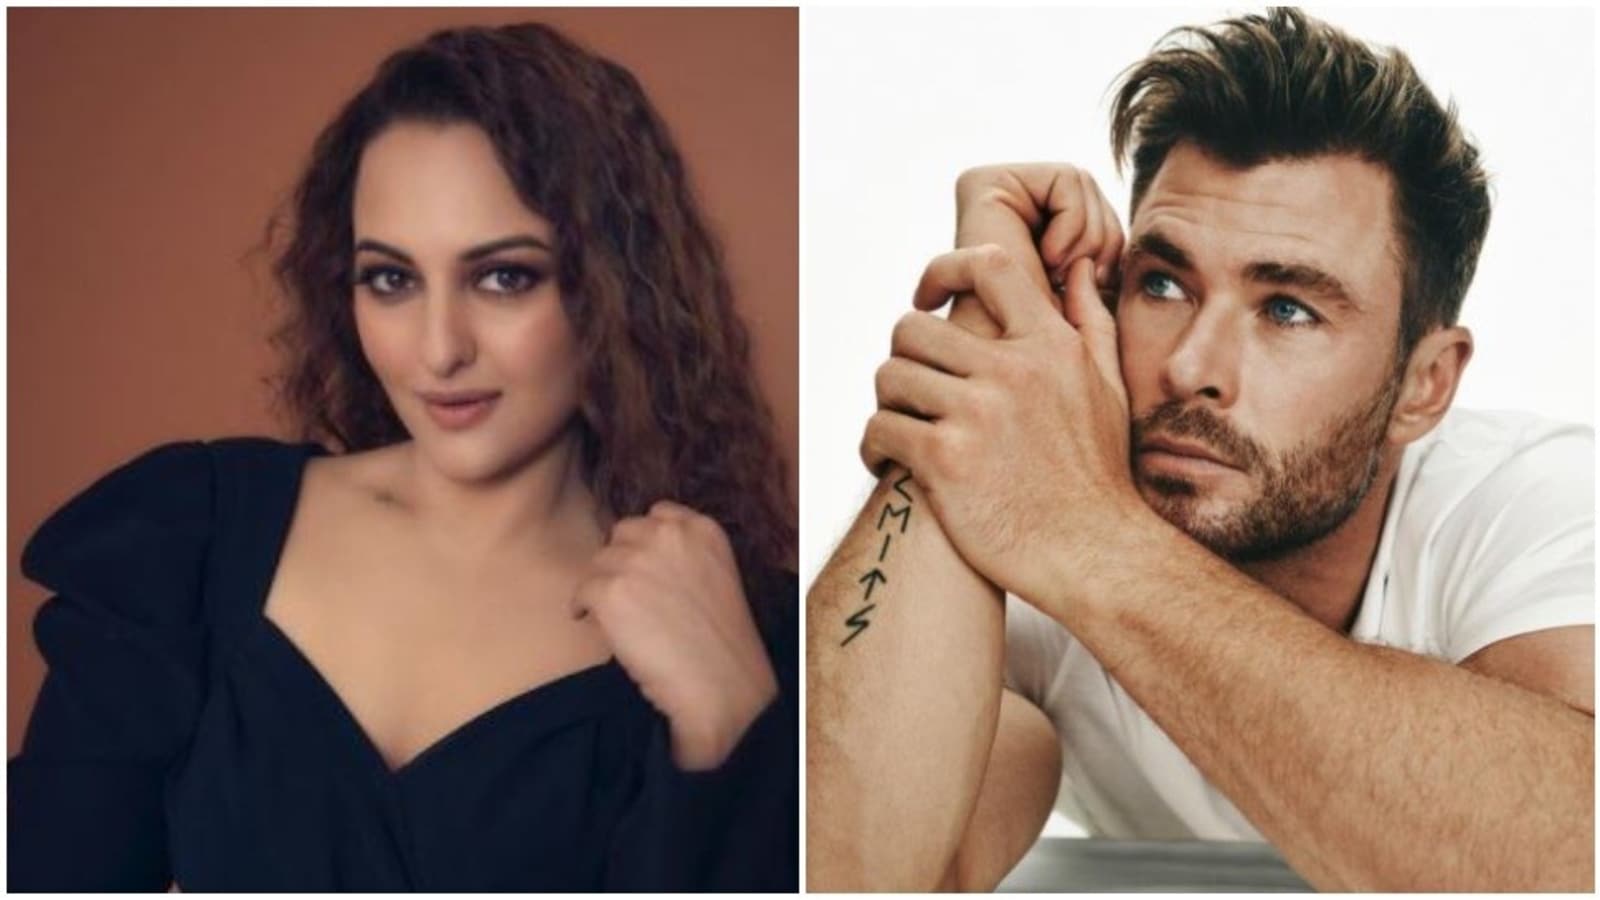 Sonakshi Sinhaxxxvideo - Chris goes 'wow' as Sonakshi reveals hobby she discovered last year. Watch  | Bollywood - Hindustan Times